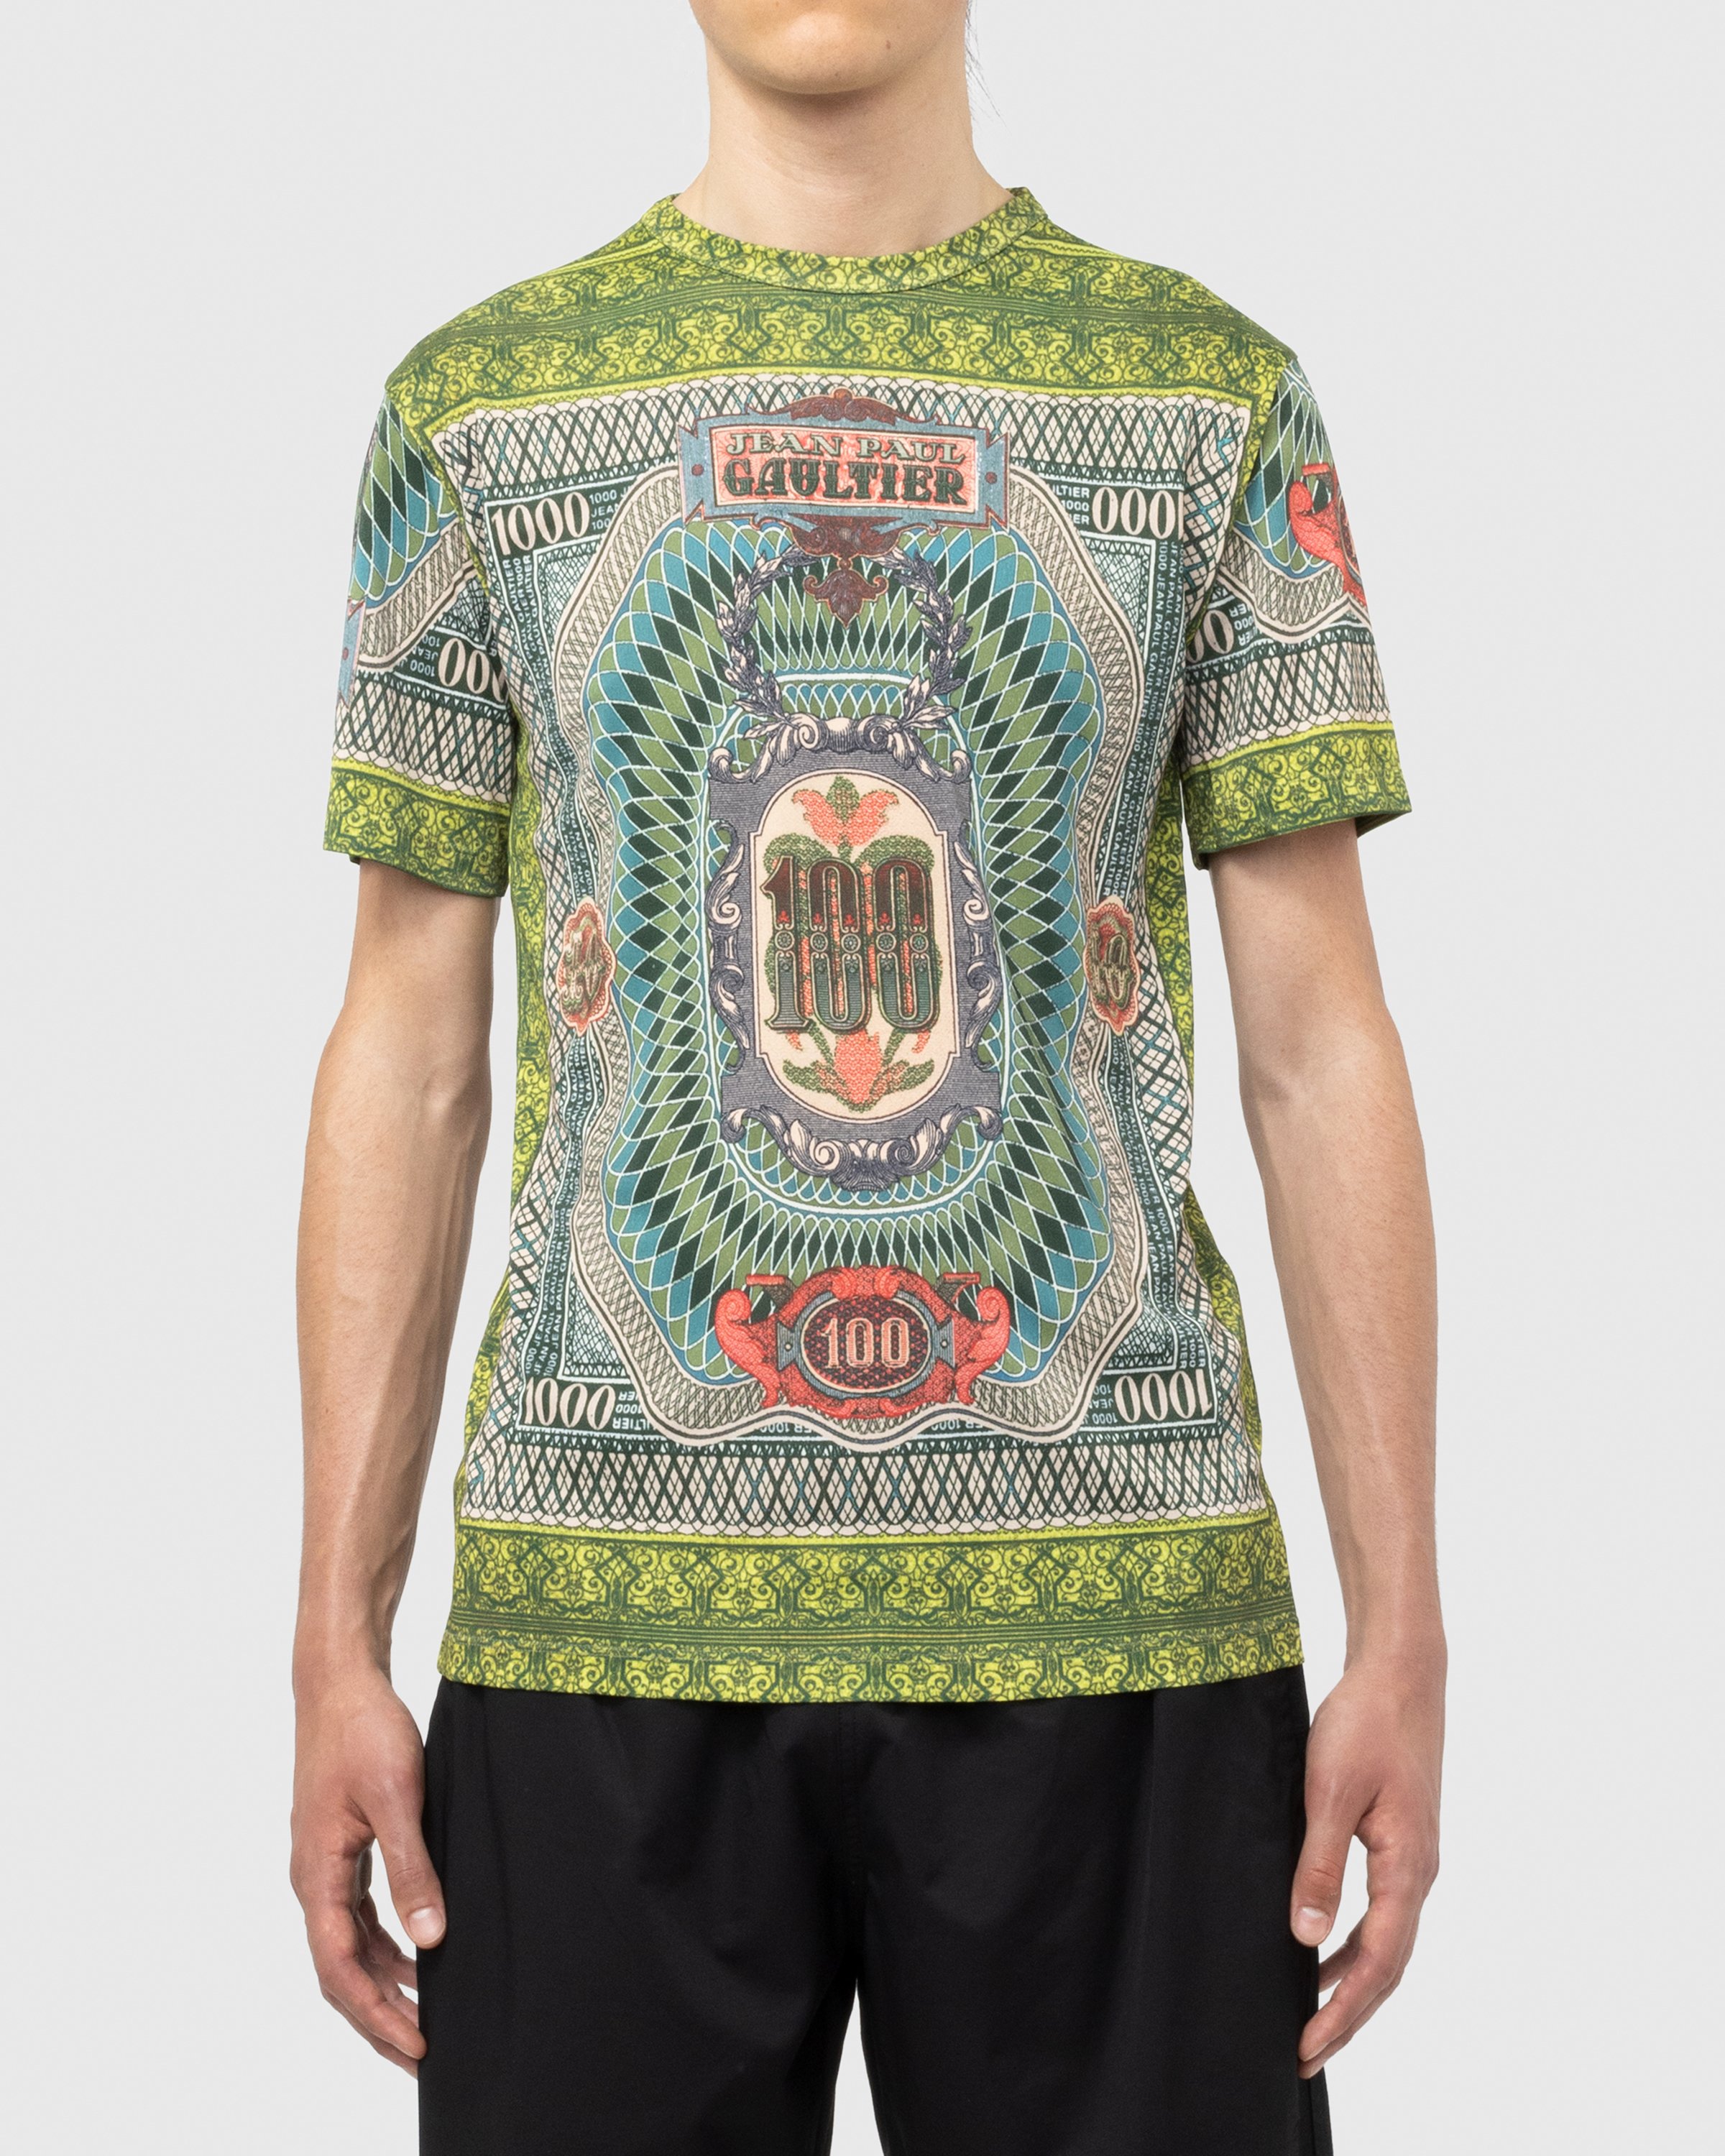 Jean Paul Gaultier - Banknote T-Shirt Multi - Clothing - Green - Image 2